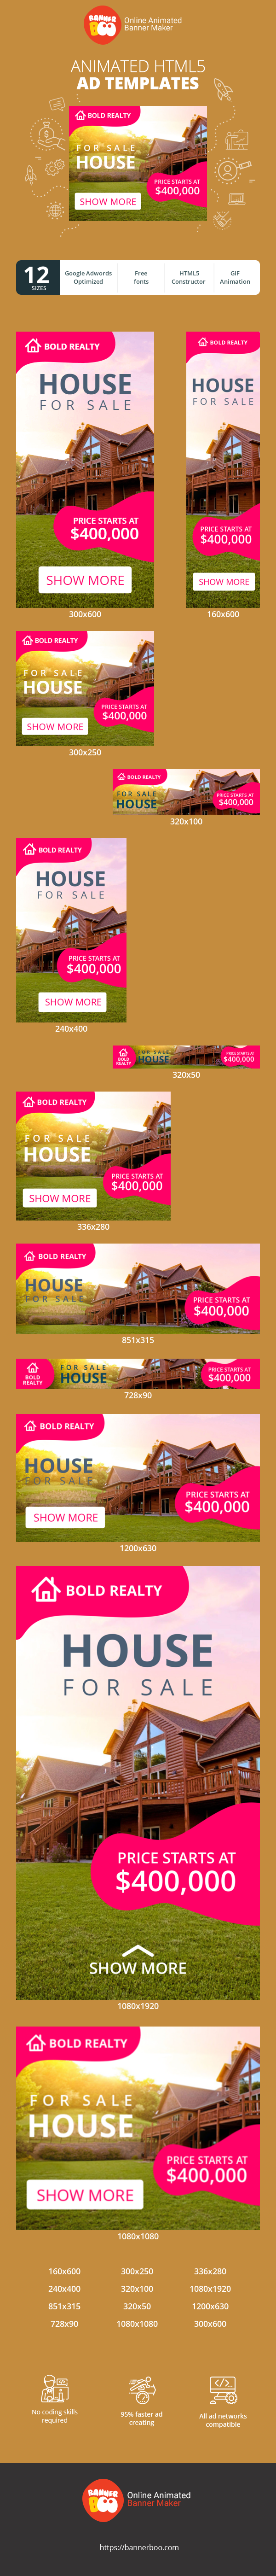 Banner ad template — House For Sale — Price Starts At $400000